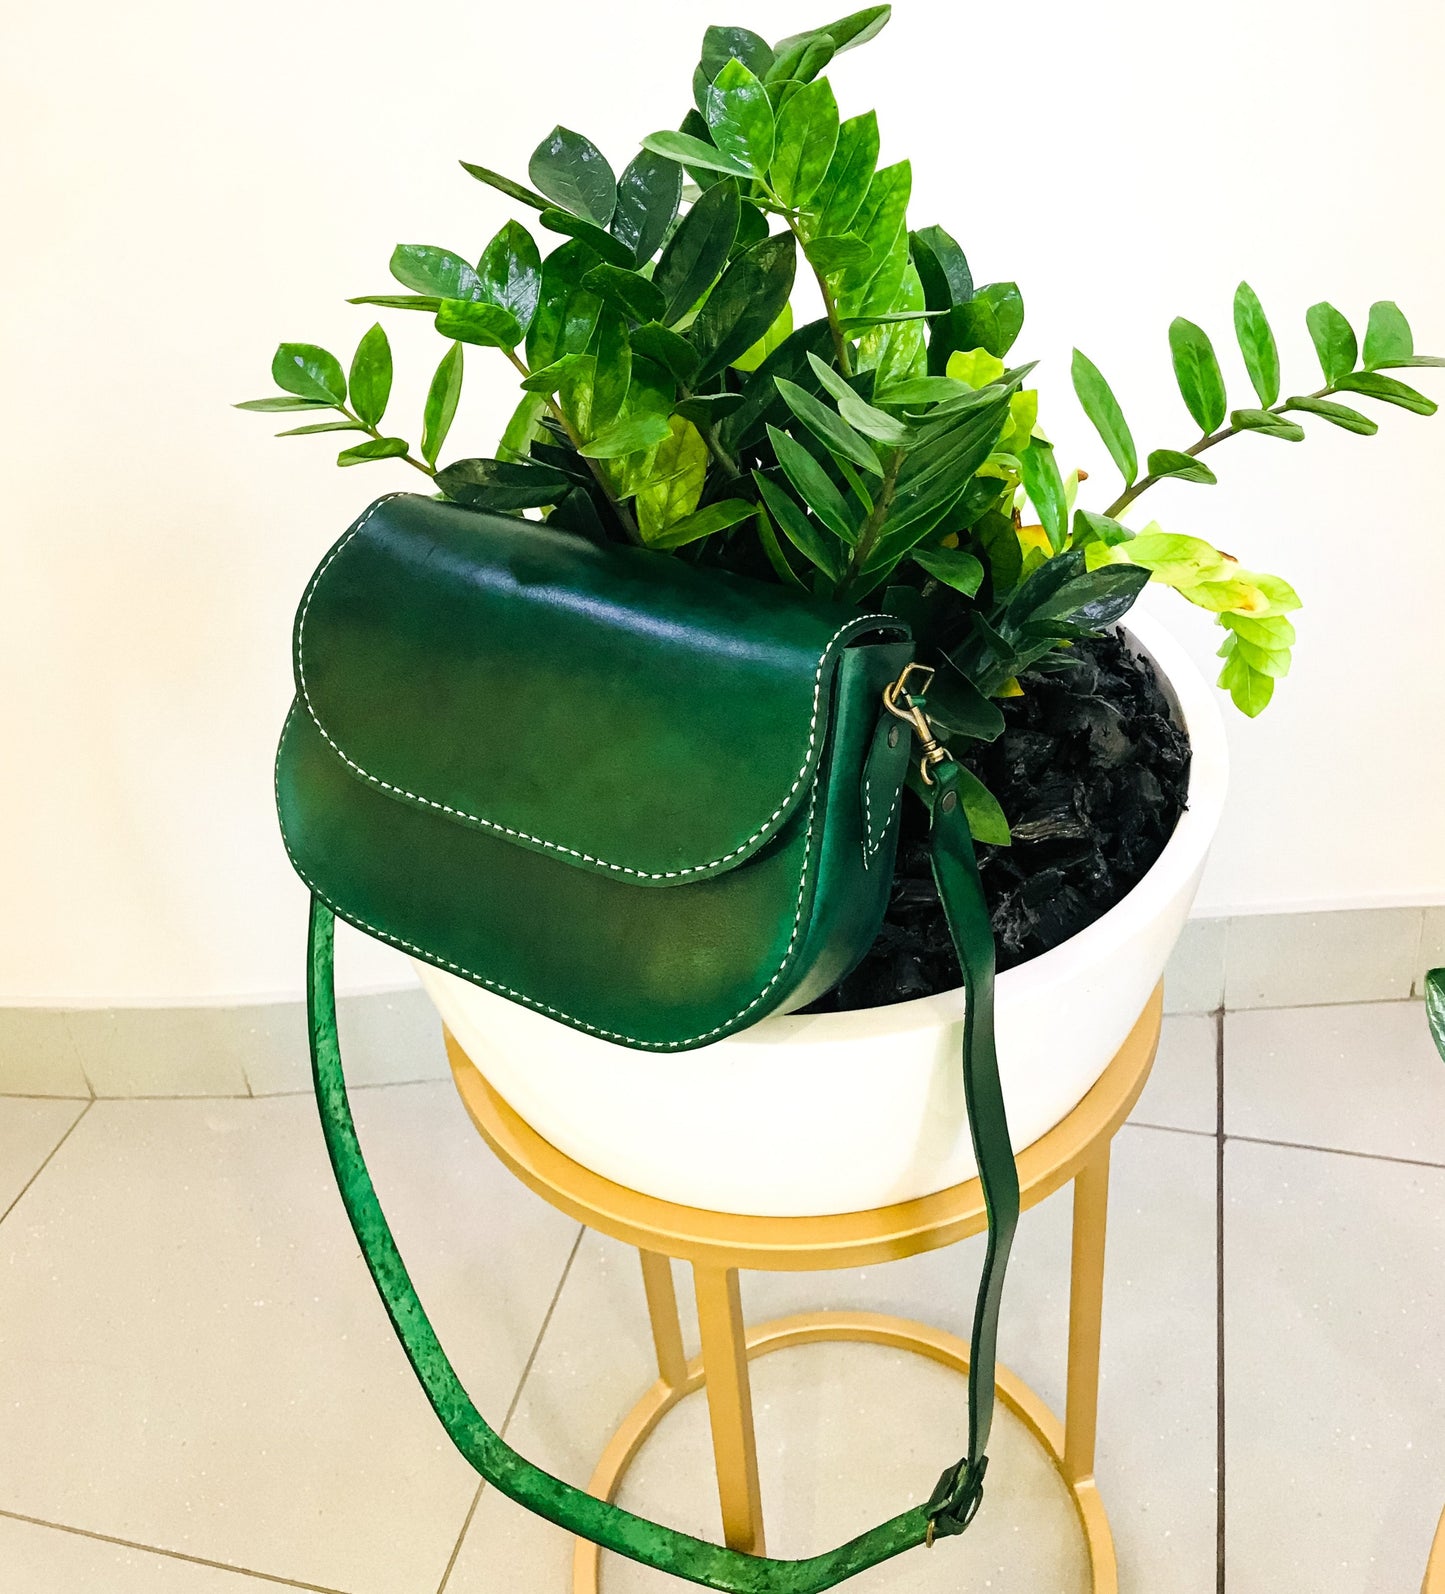 saddle stitched genuine leather green bag on a flower pot